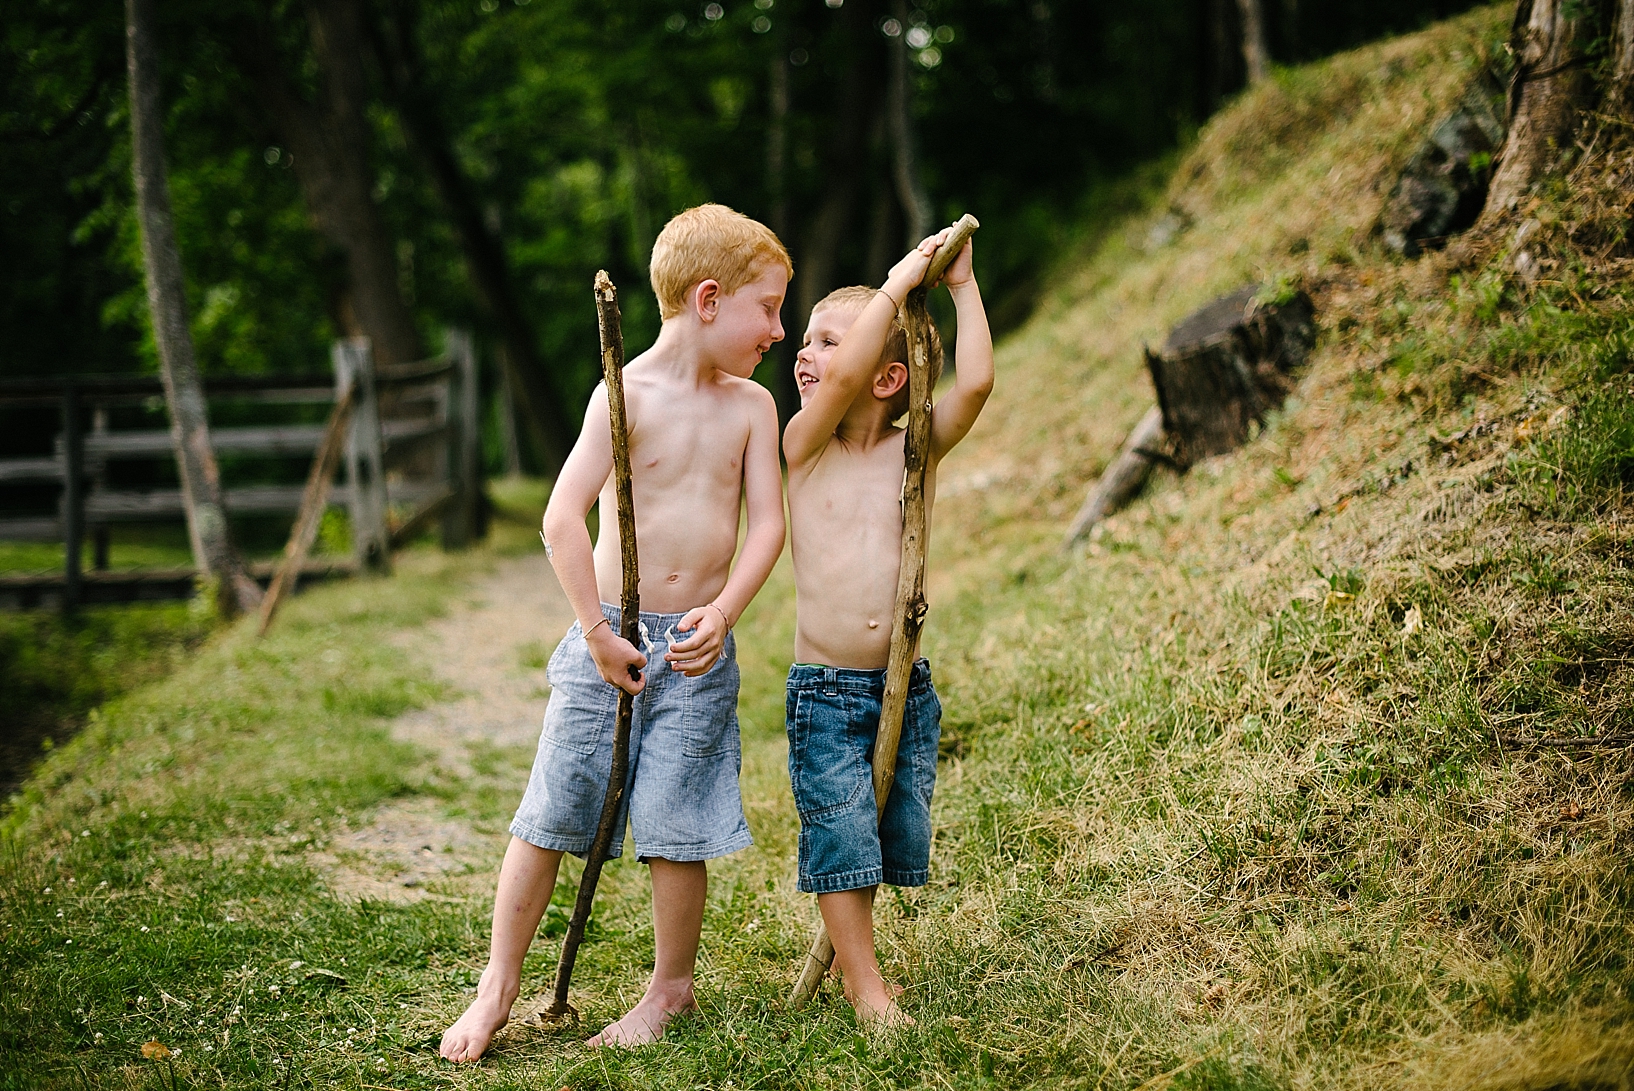 brothers with walking sticks and no shirts laughing